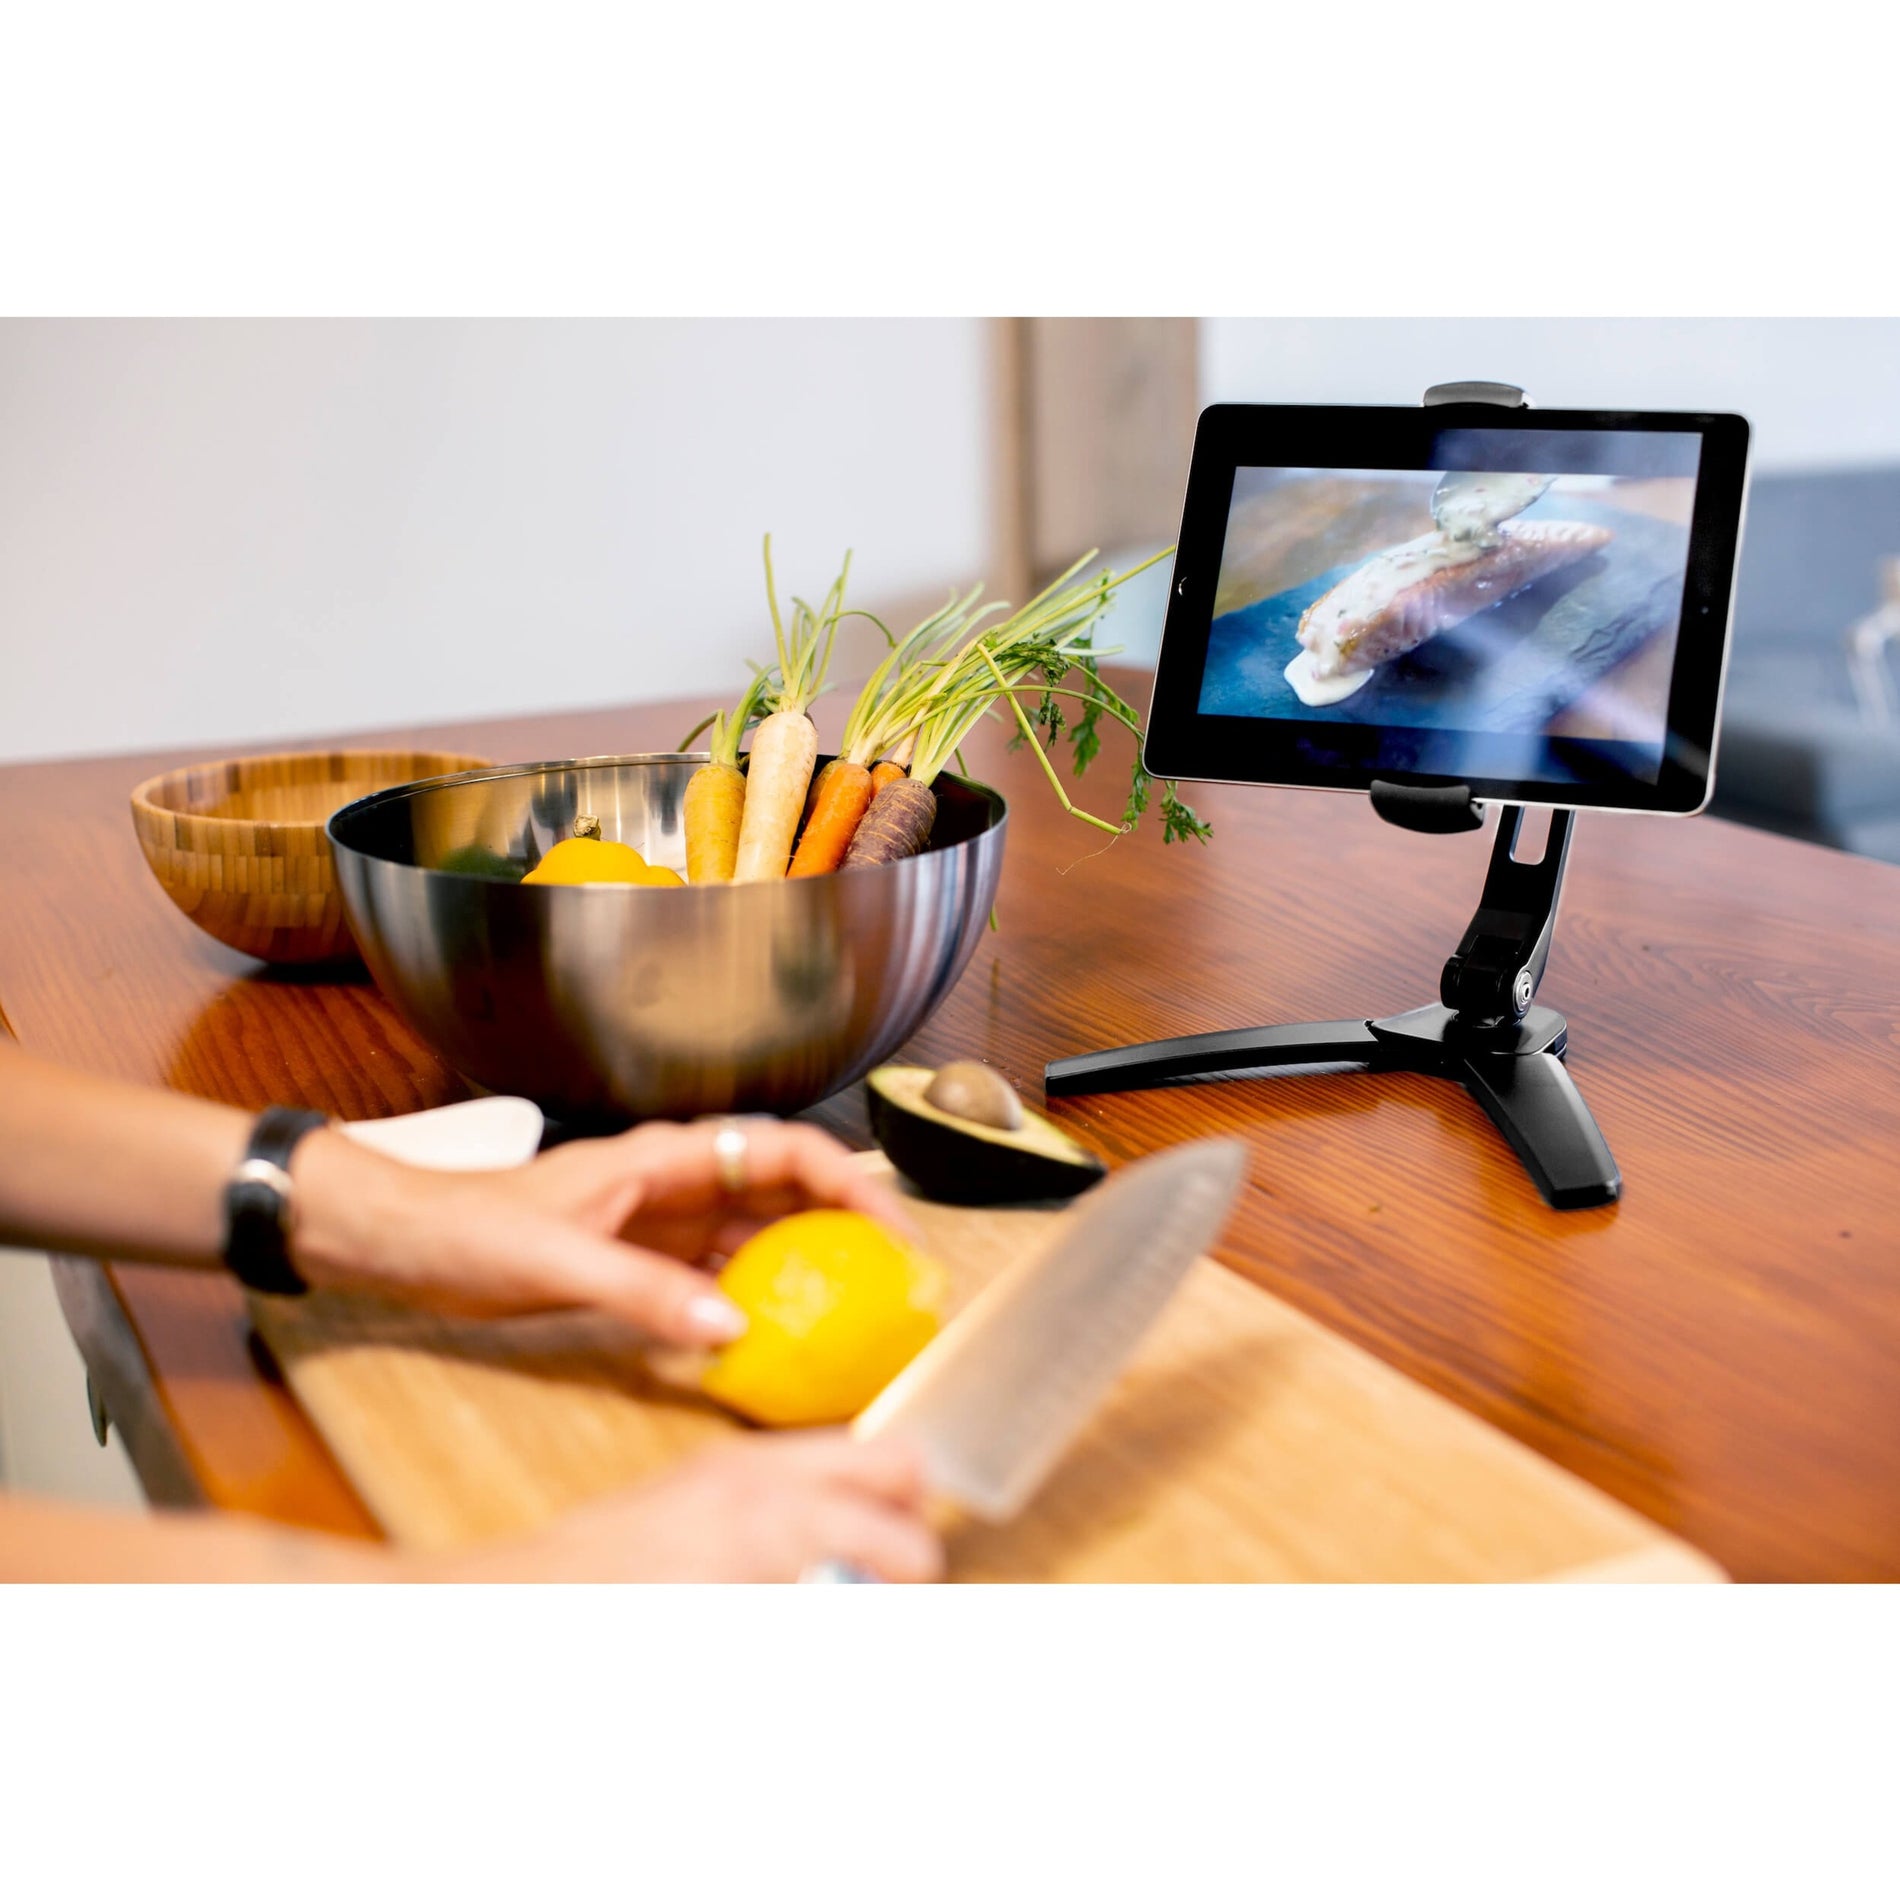 Kanto Phone & Tablet Stand - Aluminum - Black [Discontinued]